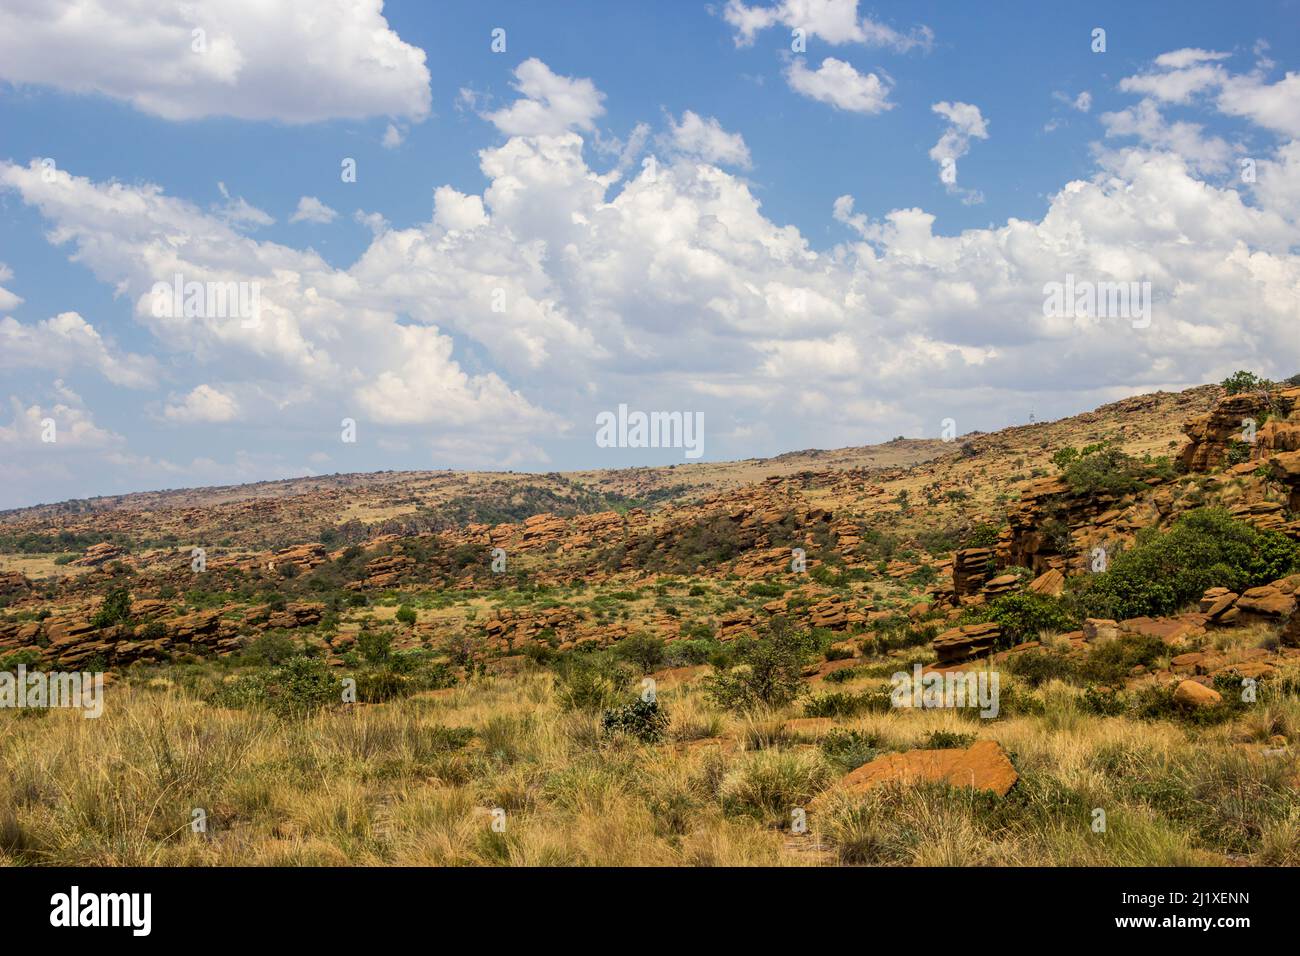 View over the rugged, boulder strewn landscape of the Magaliesberg Mountains Stock Photo